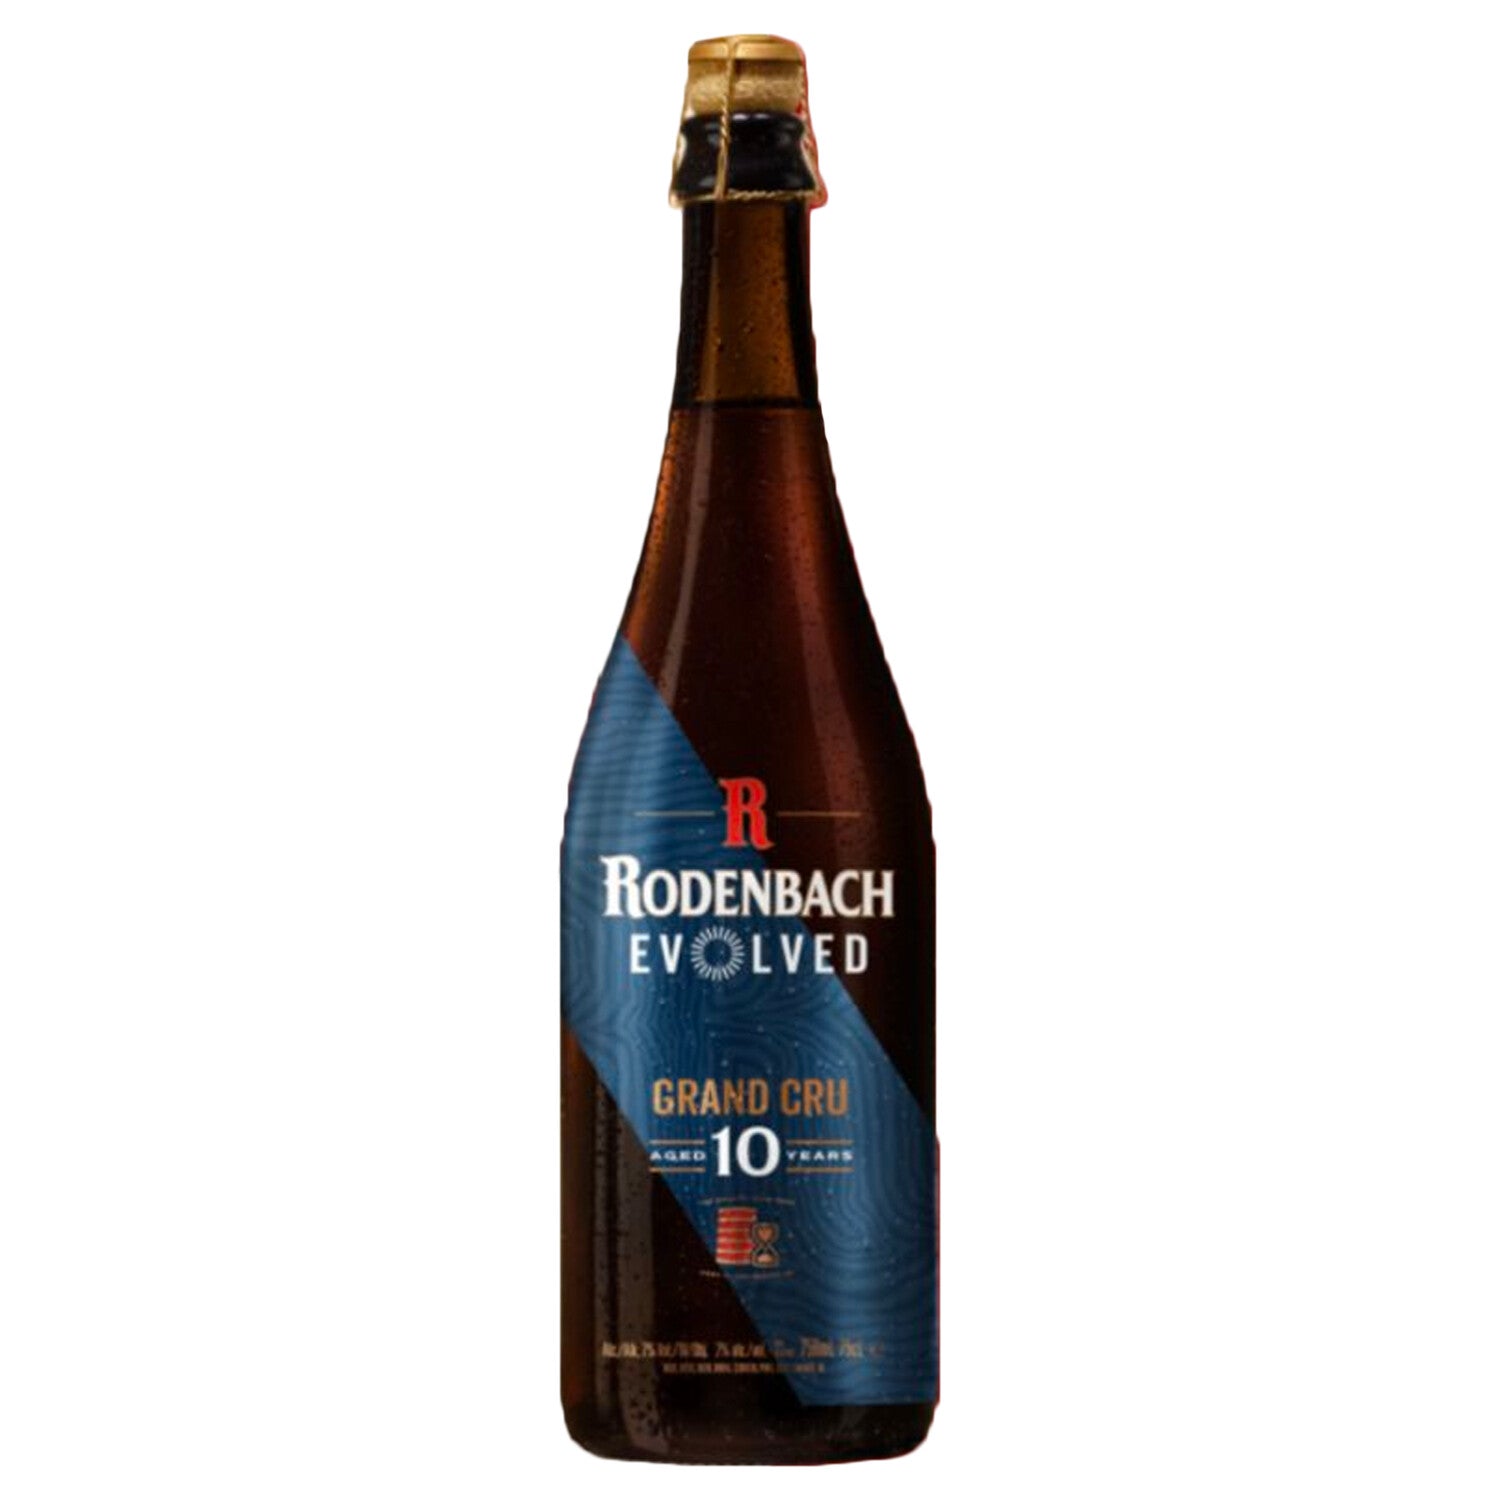 Rodenbach- Evolved Grand Cru Aged 10 Years Sour Red Ale 6% ABV 750ml Bottle